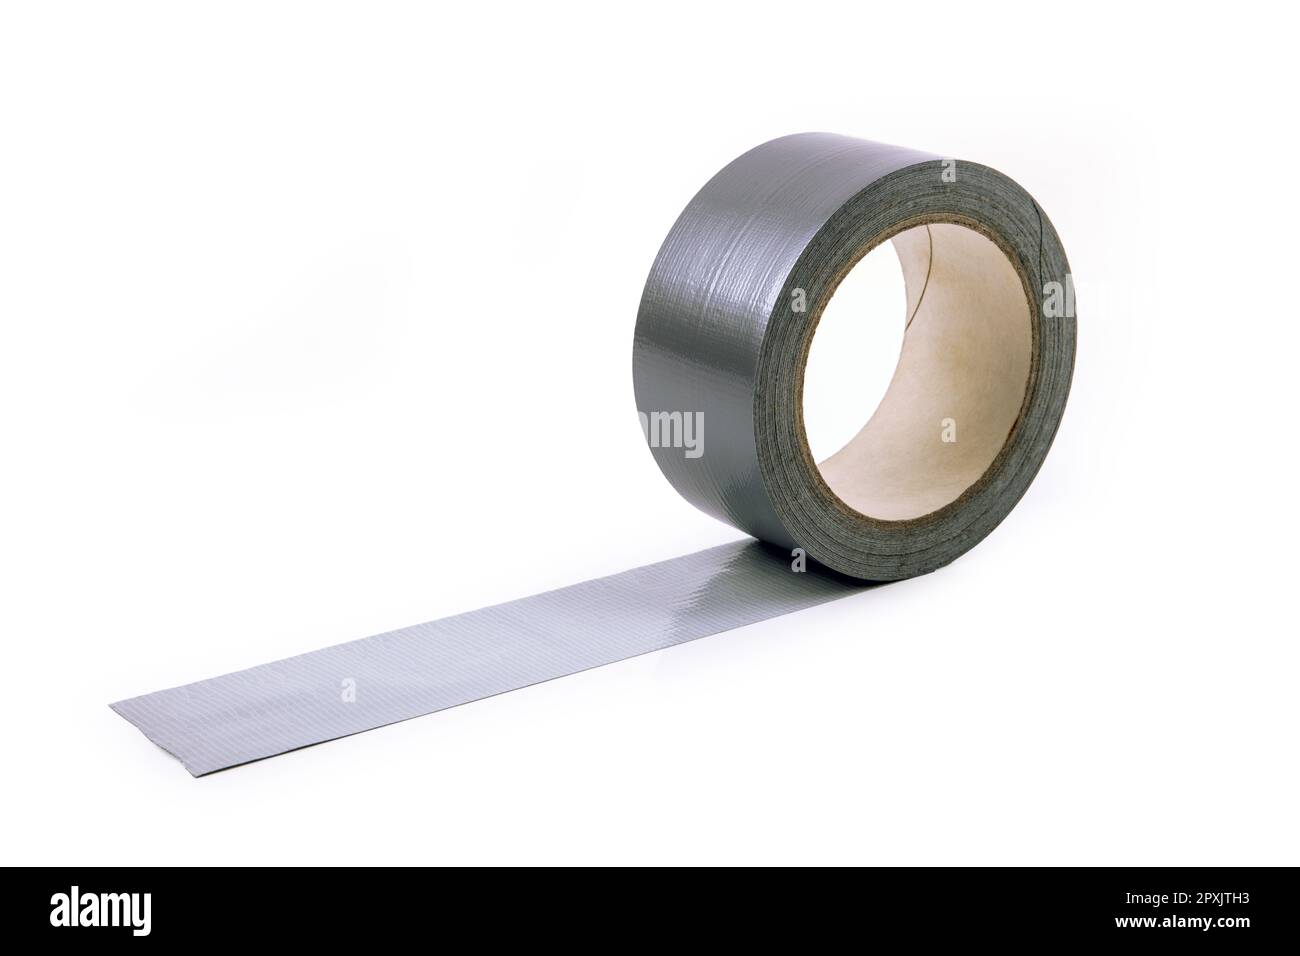 Roll of a dhesive Tape isolated over white background Stock Photo